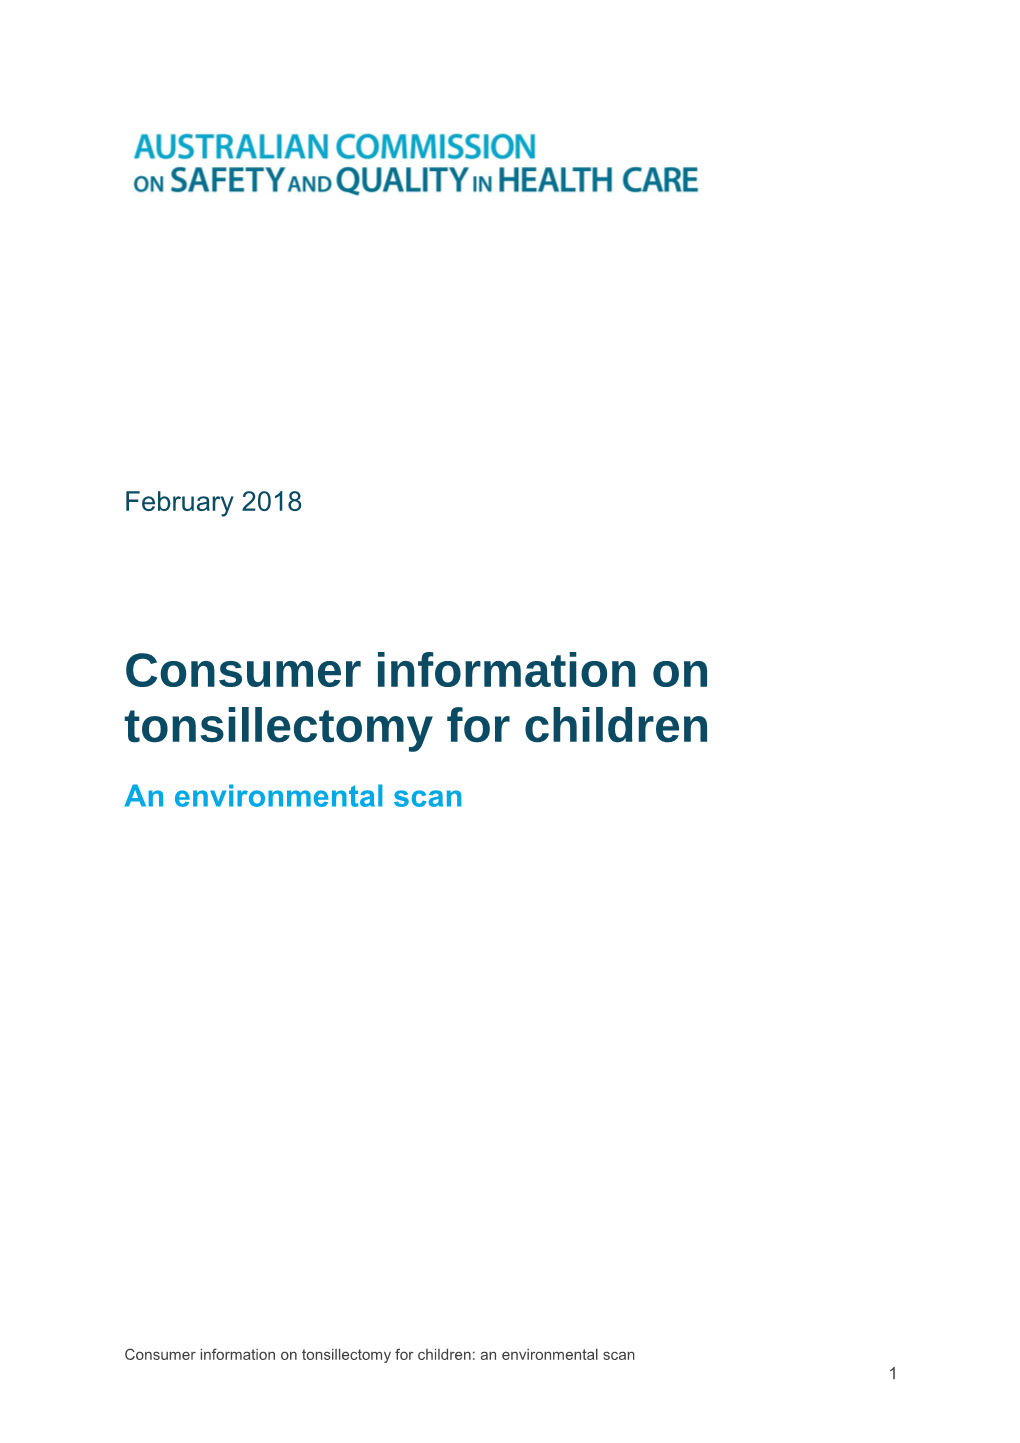 Consumer Information on Tonsillectomy for Children